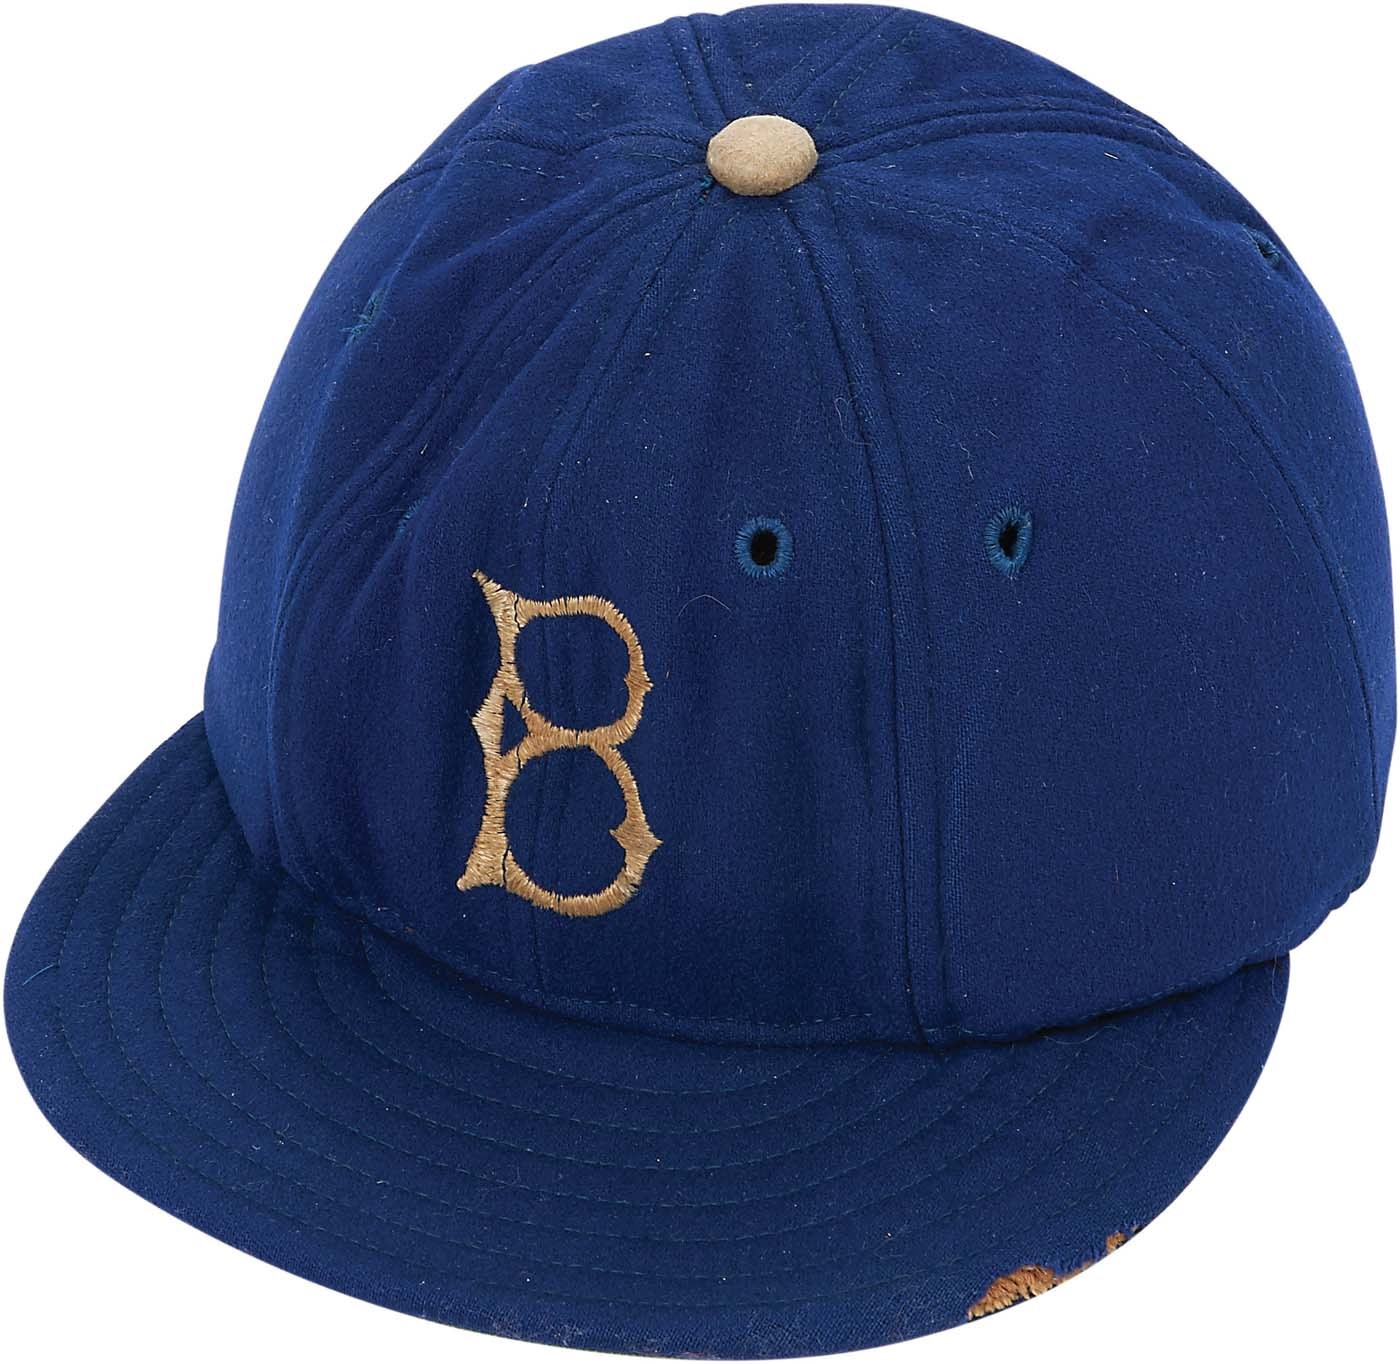 Jackie Robinson & Brooklyn Dodgers - 1947 Jackie Robinson Rookie Year Cap - Used To Fend Off Racially Motivated Beanballs (Rachel Robinson Letter)